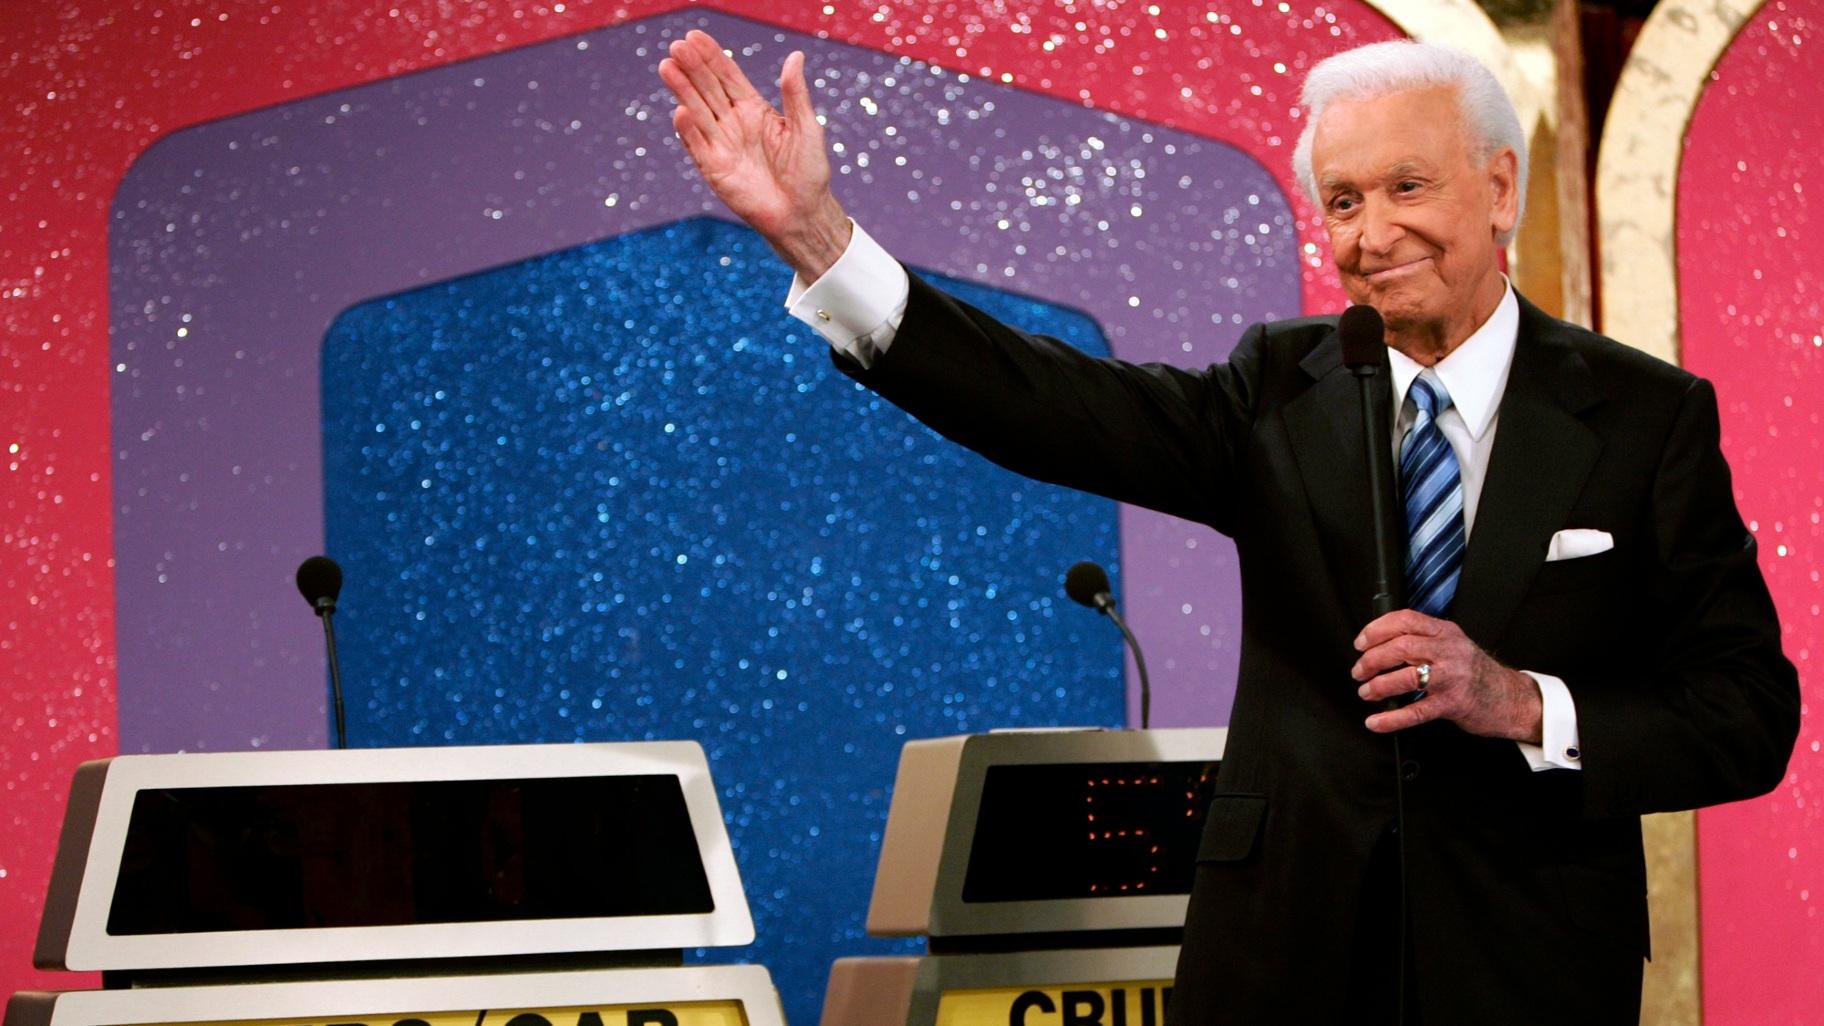 FILE - Legendary game show host Bob Barker, 83, waves goodbye as he tapes his final episode of "The Price Is Right," in Los Angeles on Wednesday, June 6, 2007. (AP Photo / Damian Dovarganes, File)